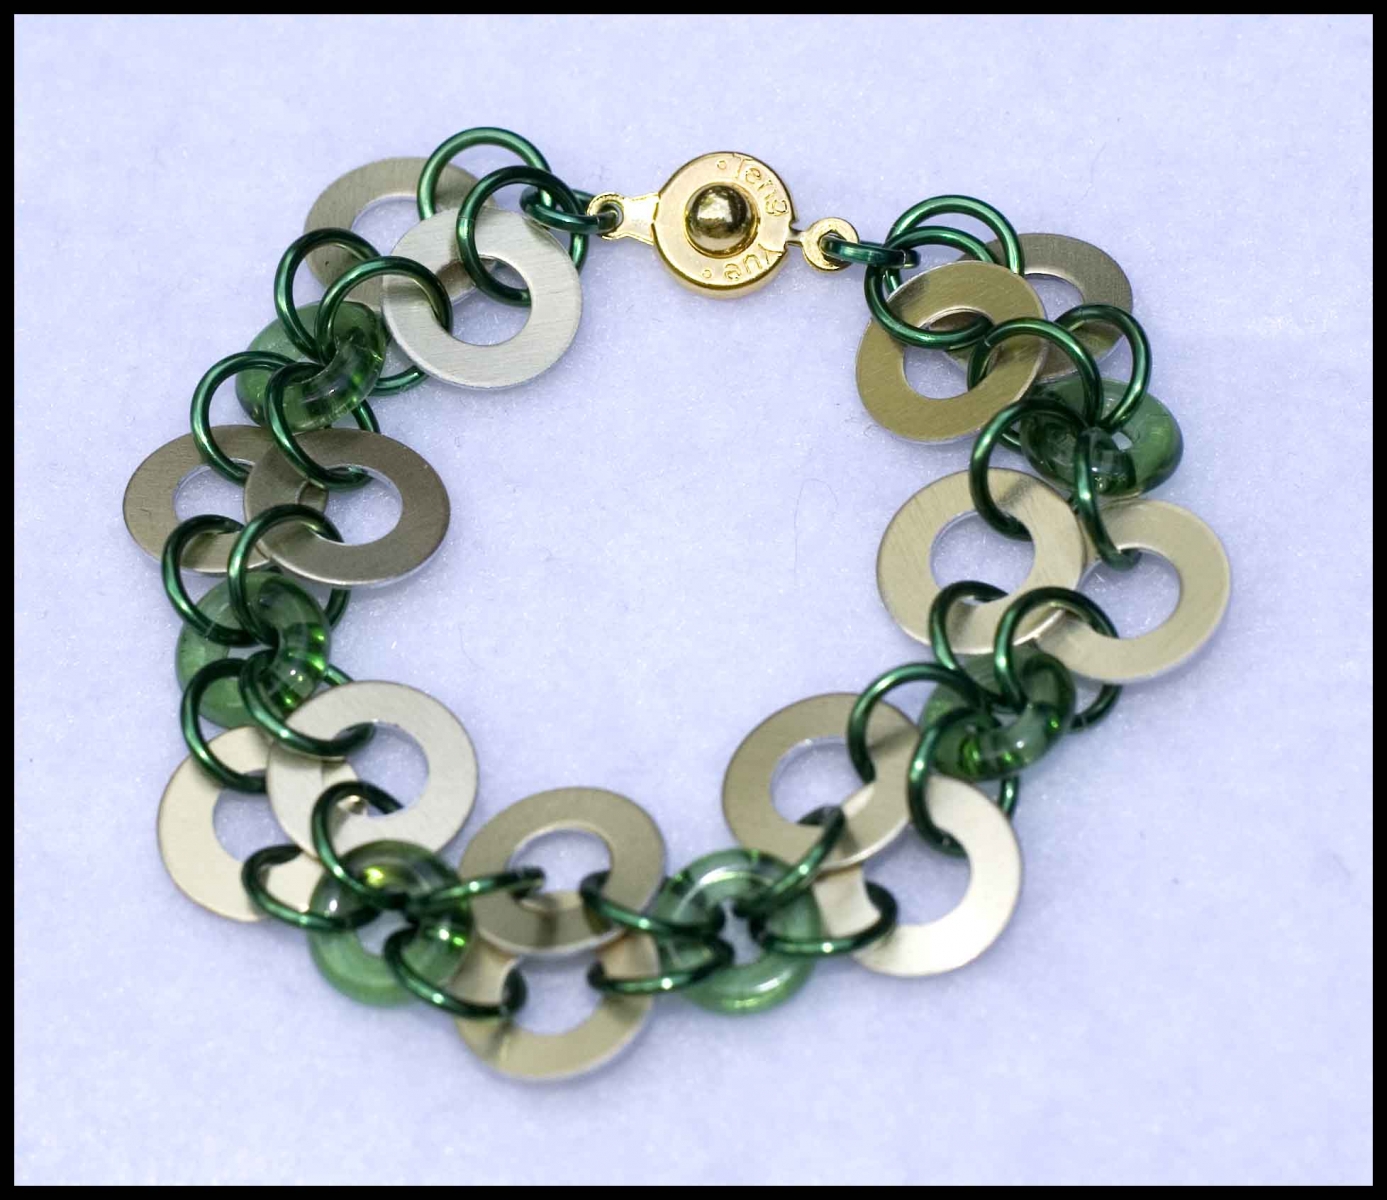 Round scales and green donut beads